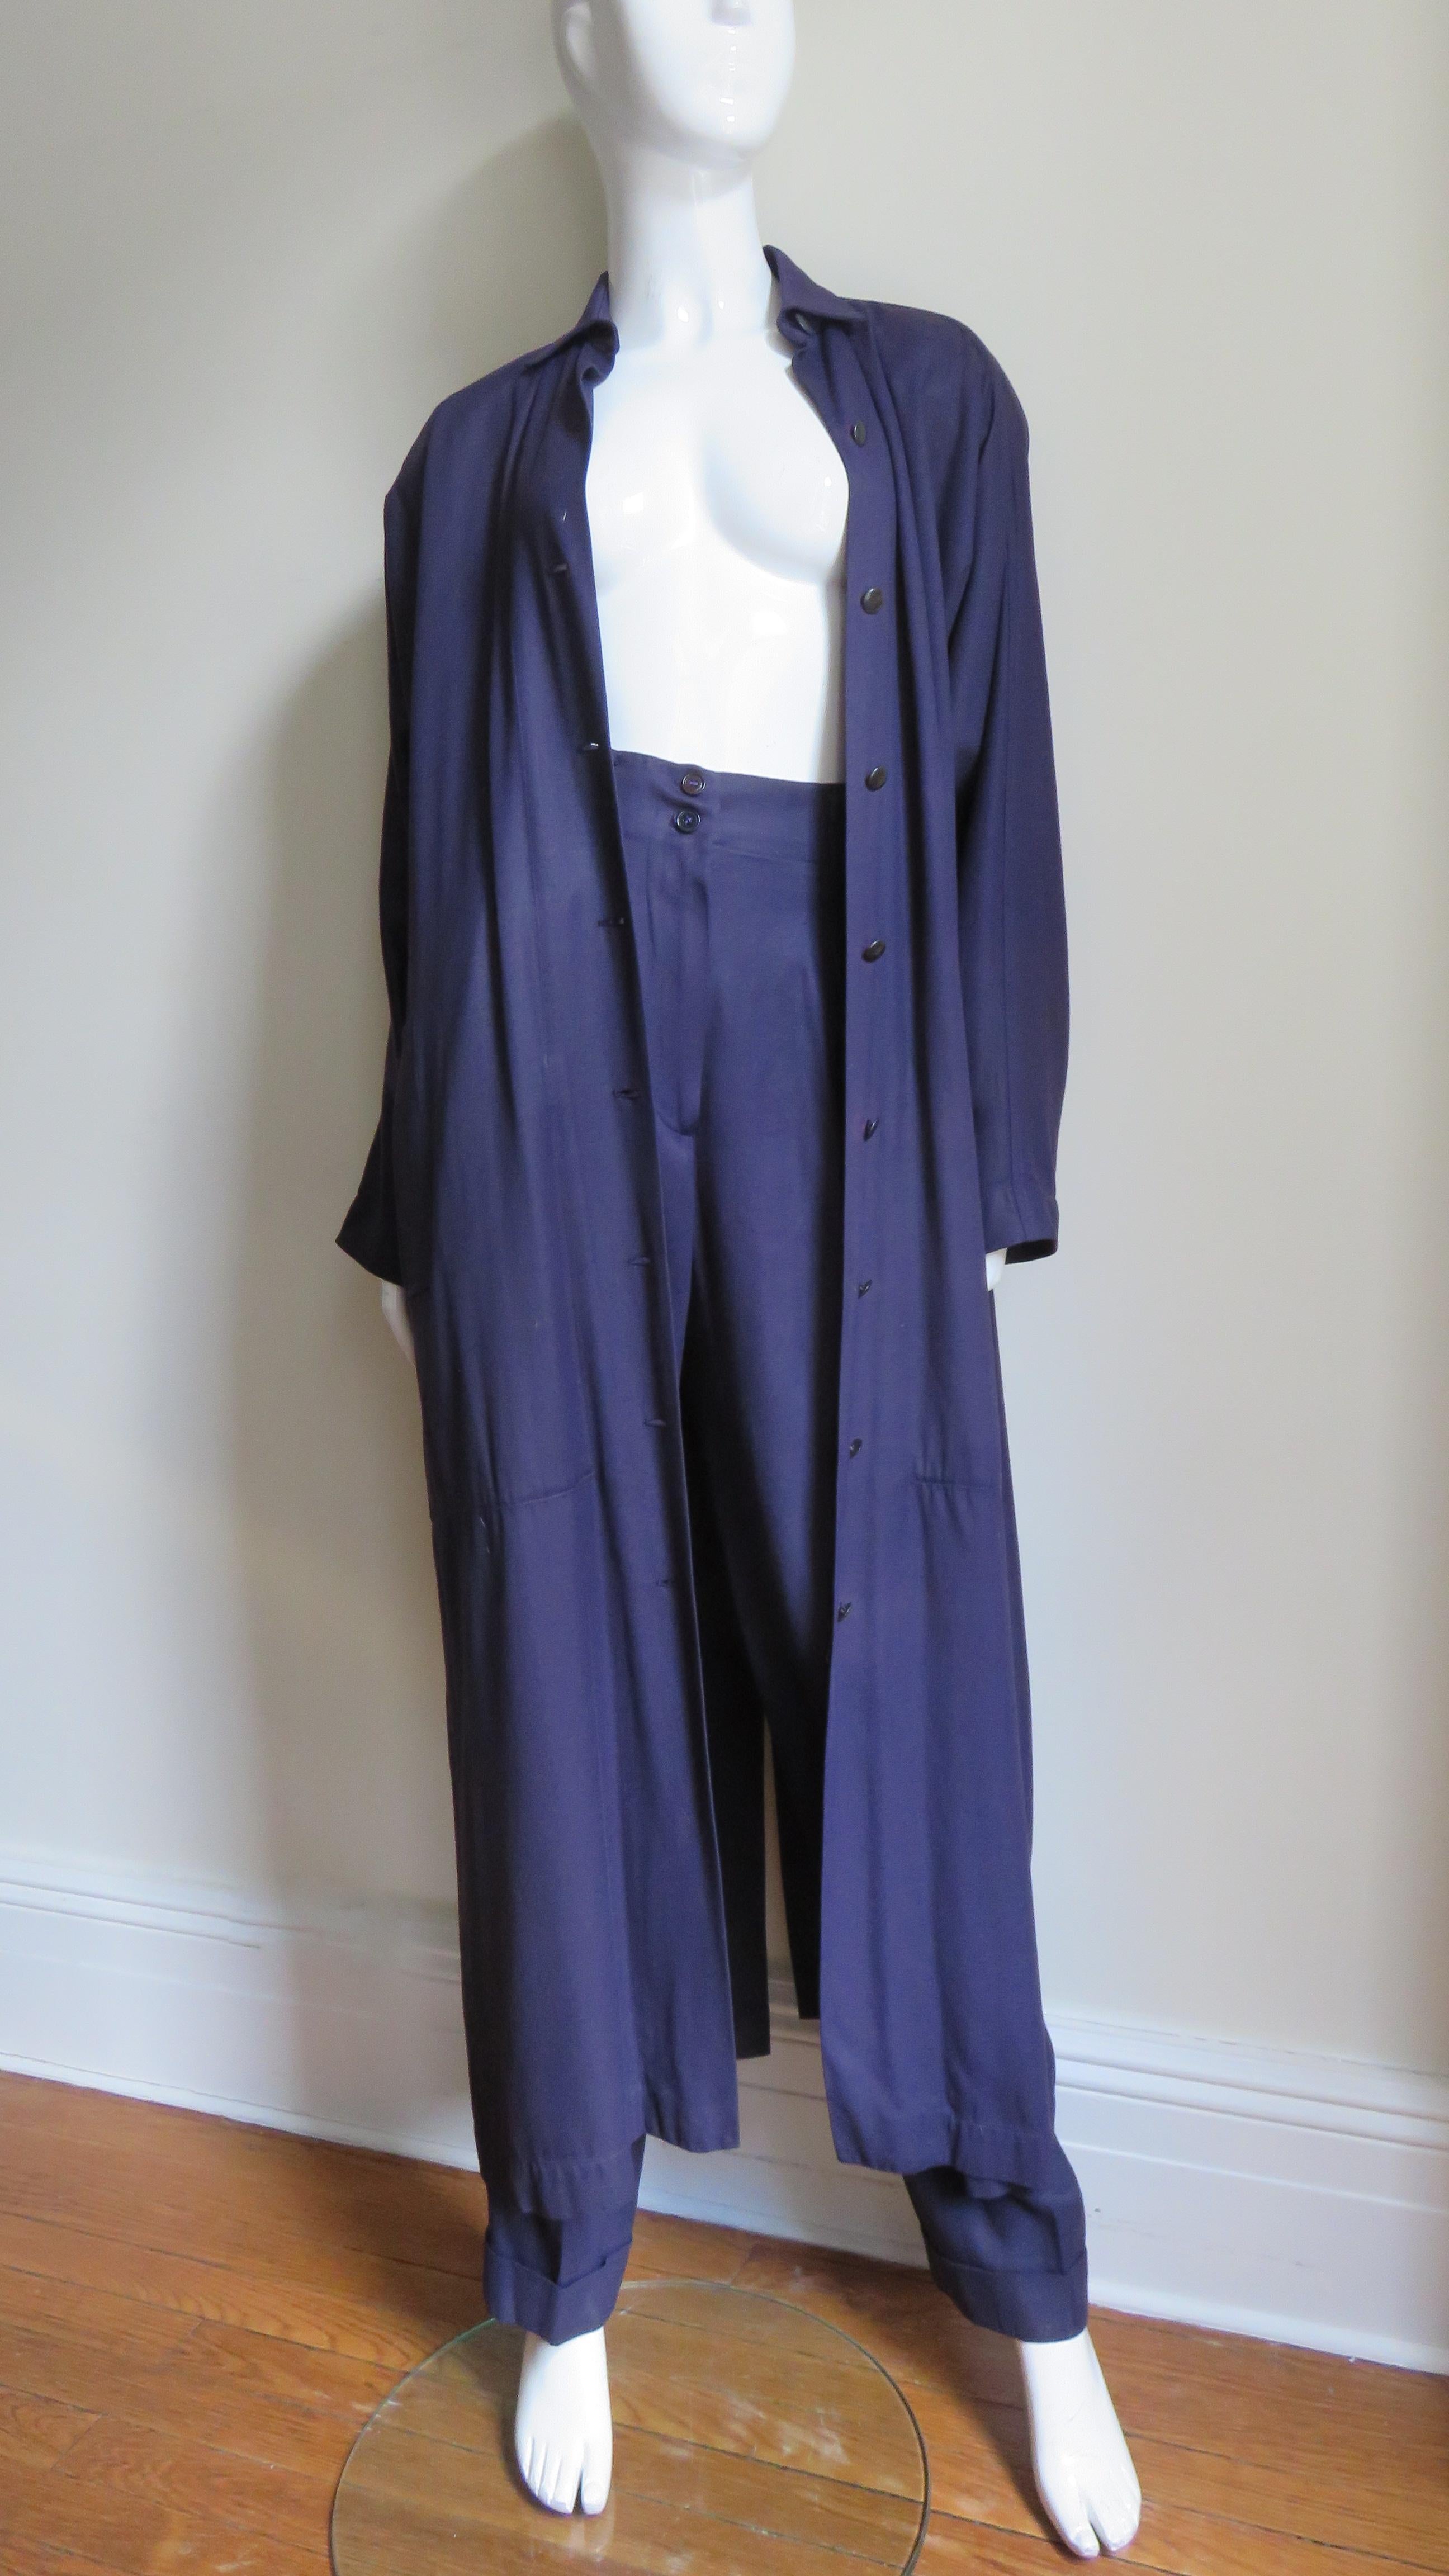 A fabulous eggplant purple long coat and pants set from Azzedine Alaia.  The long duster trench coat has a collar, black metal buttons up the front, padded shoulders, dolman sleeves, side seam pockets and a deep slit at the back hem.  The pants have